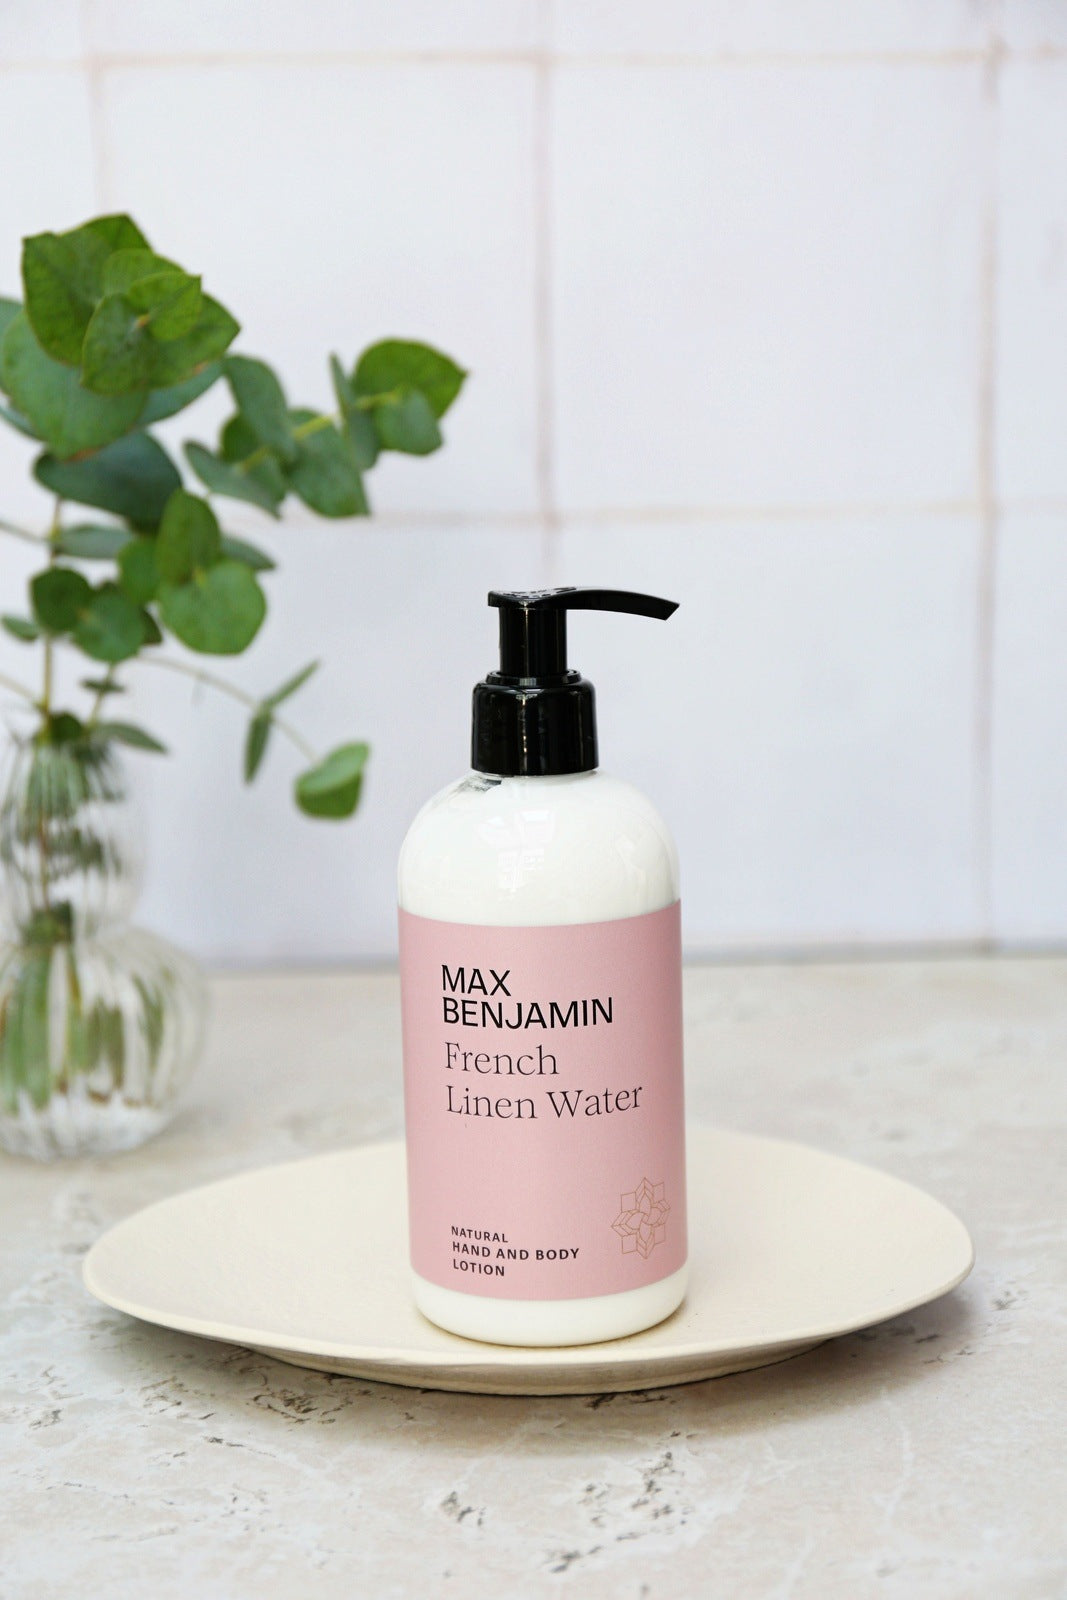 Max Benjamin Hand And Body Lotion French Linen Water 300ml 1 Shaws Department Stores